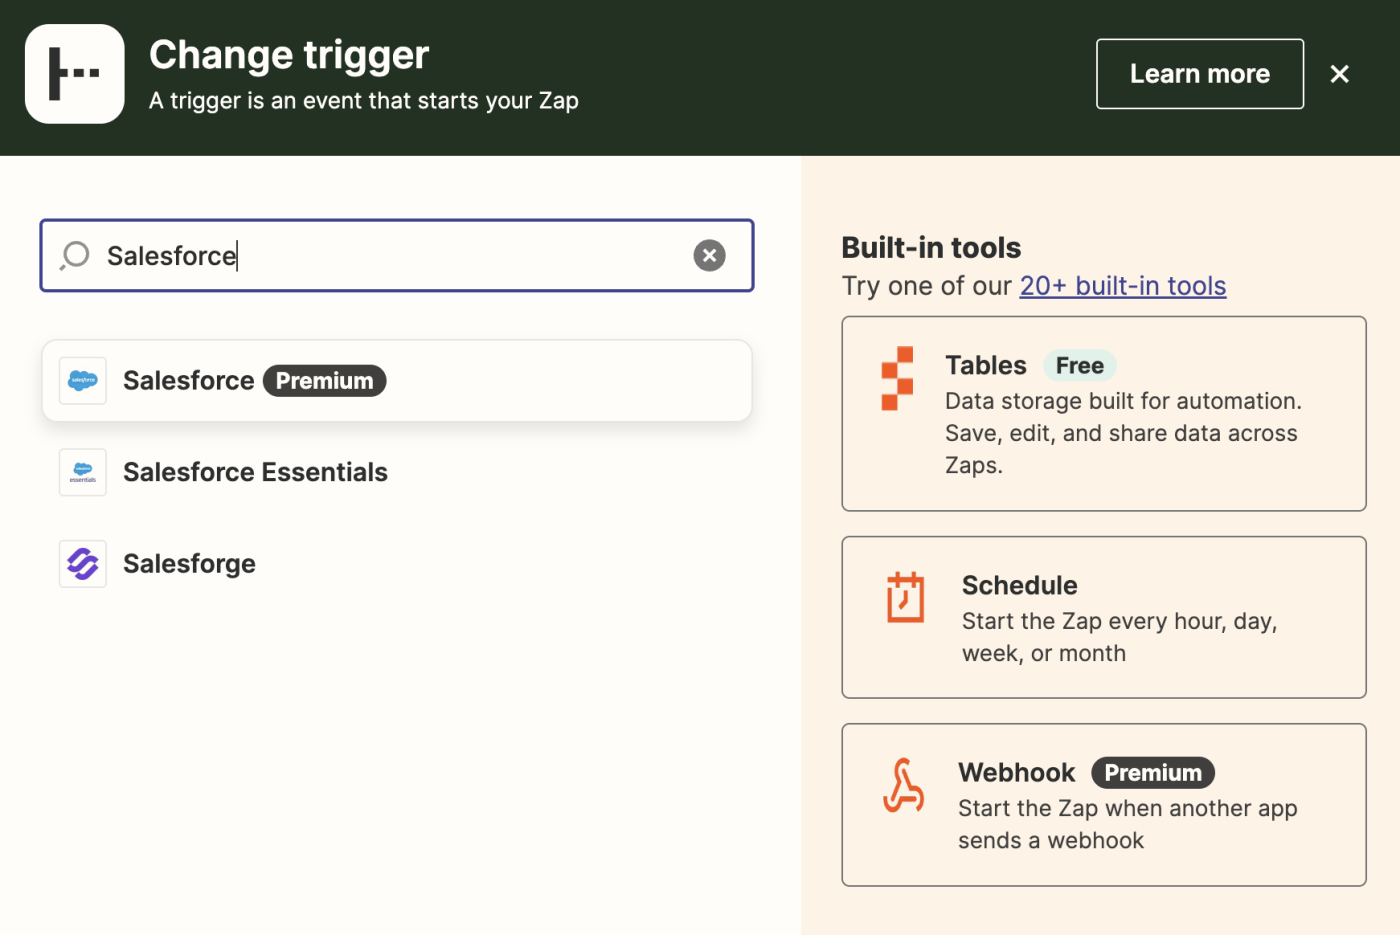 A trigger step in the Zap editor with "Salesforce" added to the trigger app search field.